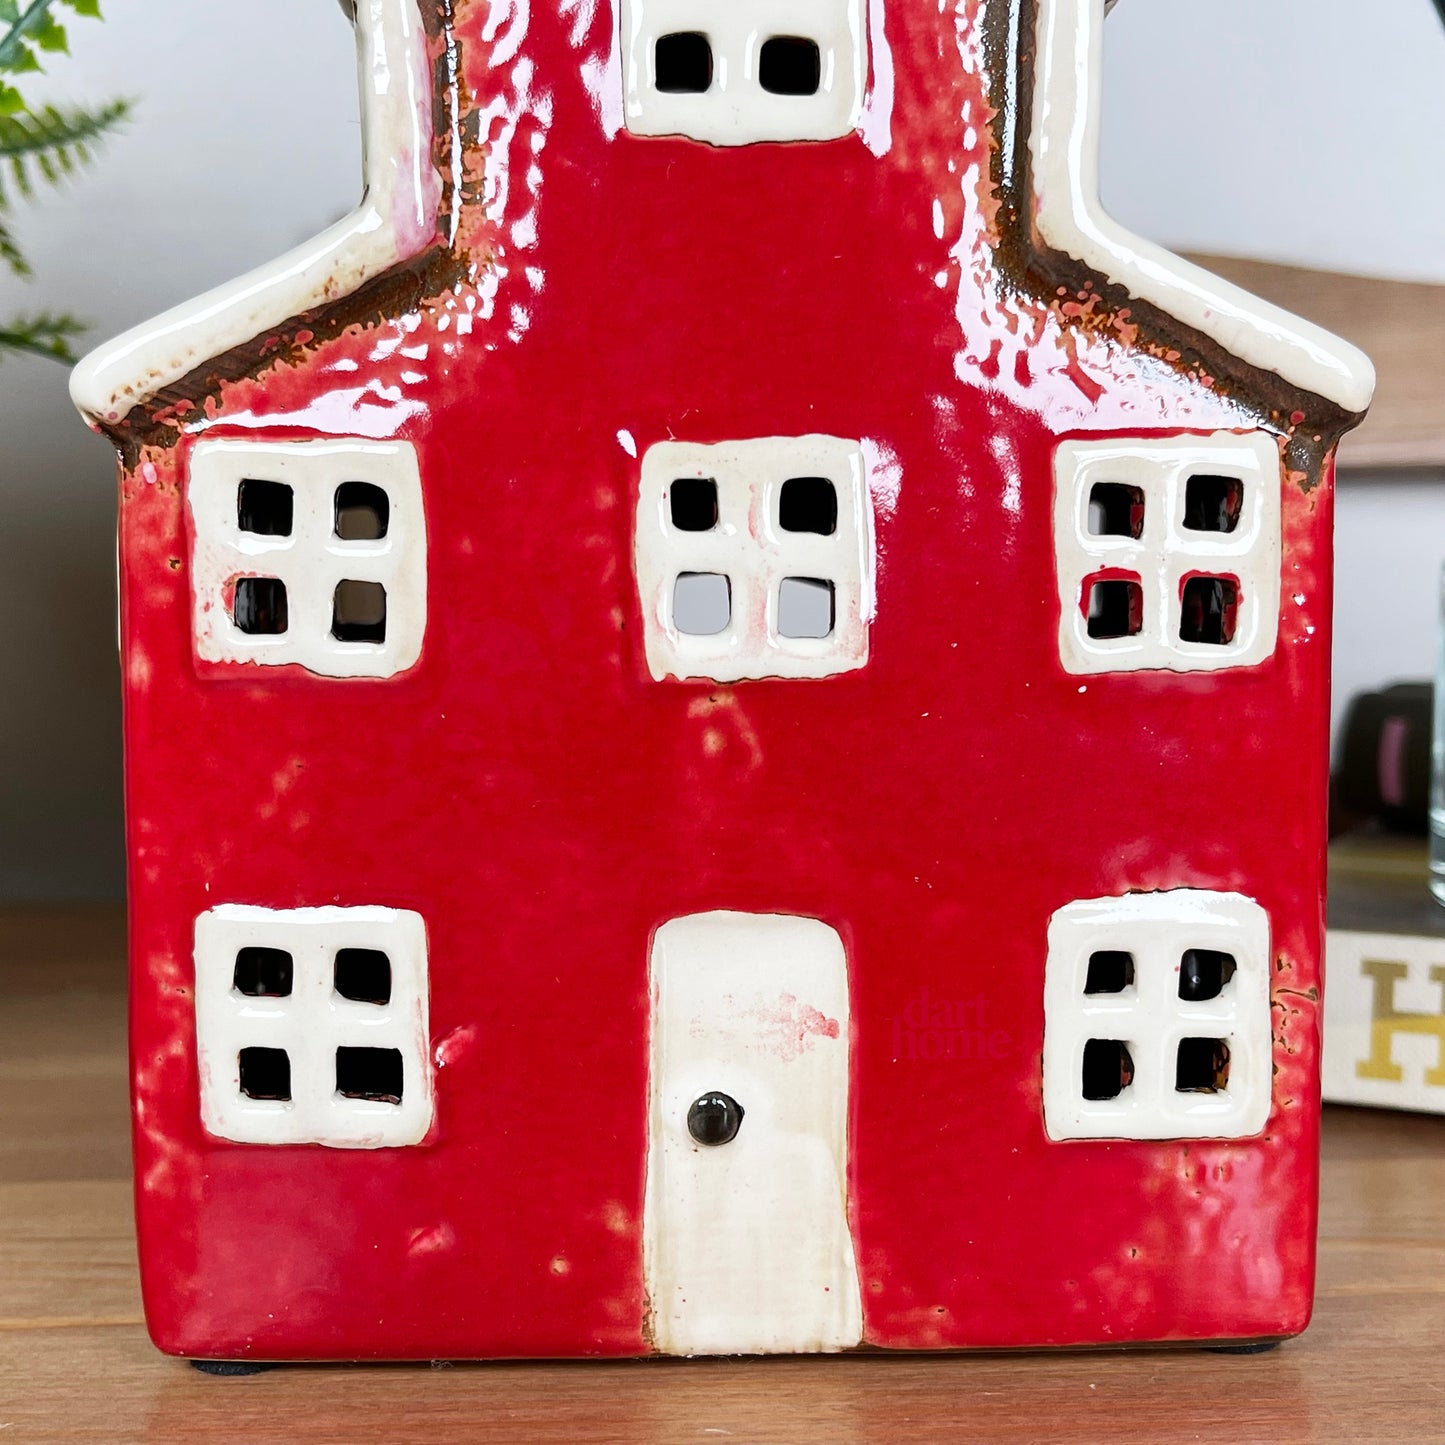 Red Farm House Candle Holder